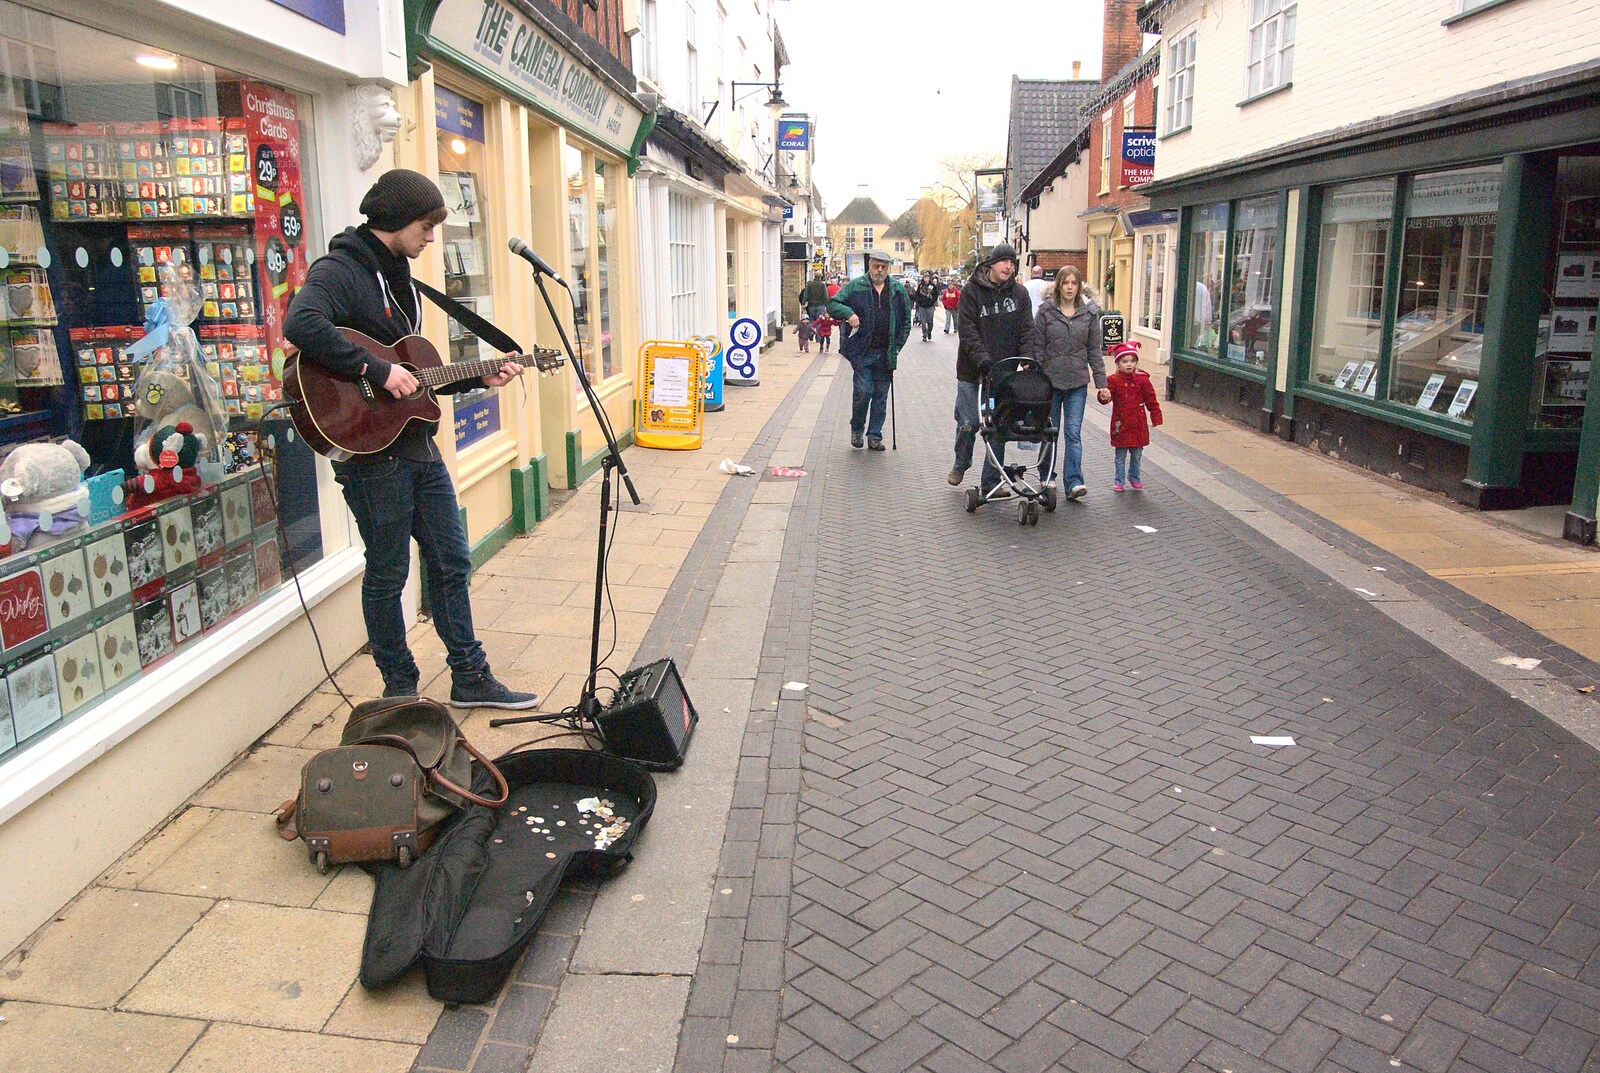 Felix Simpson on Mere Street from Grandad's New House, and Discord by the Mere, Roydon and Diss, Norfolk - 21st December 2011